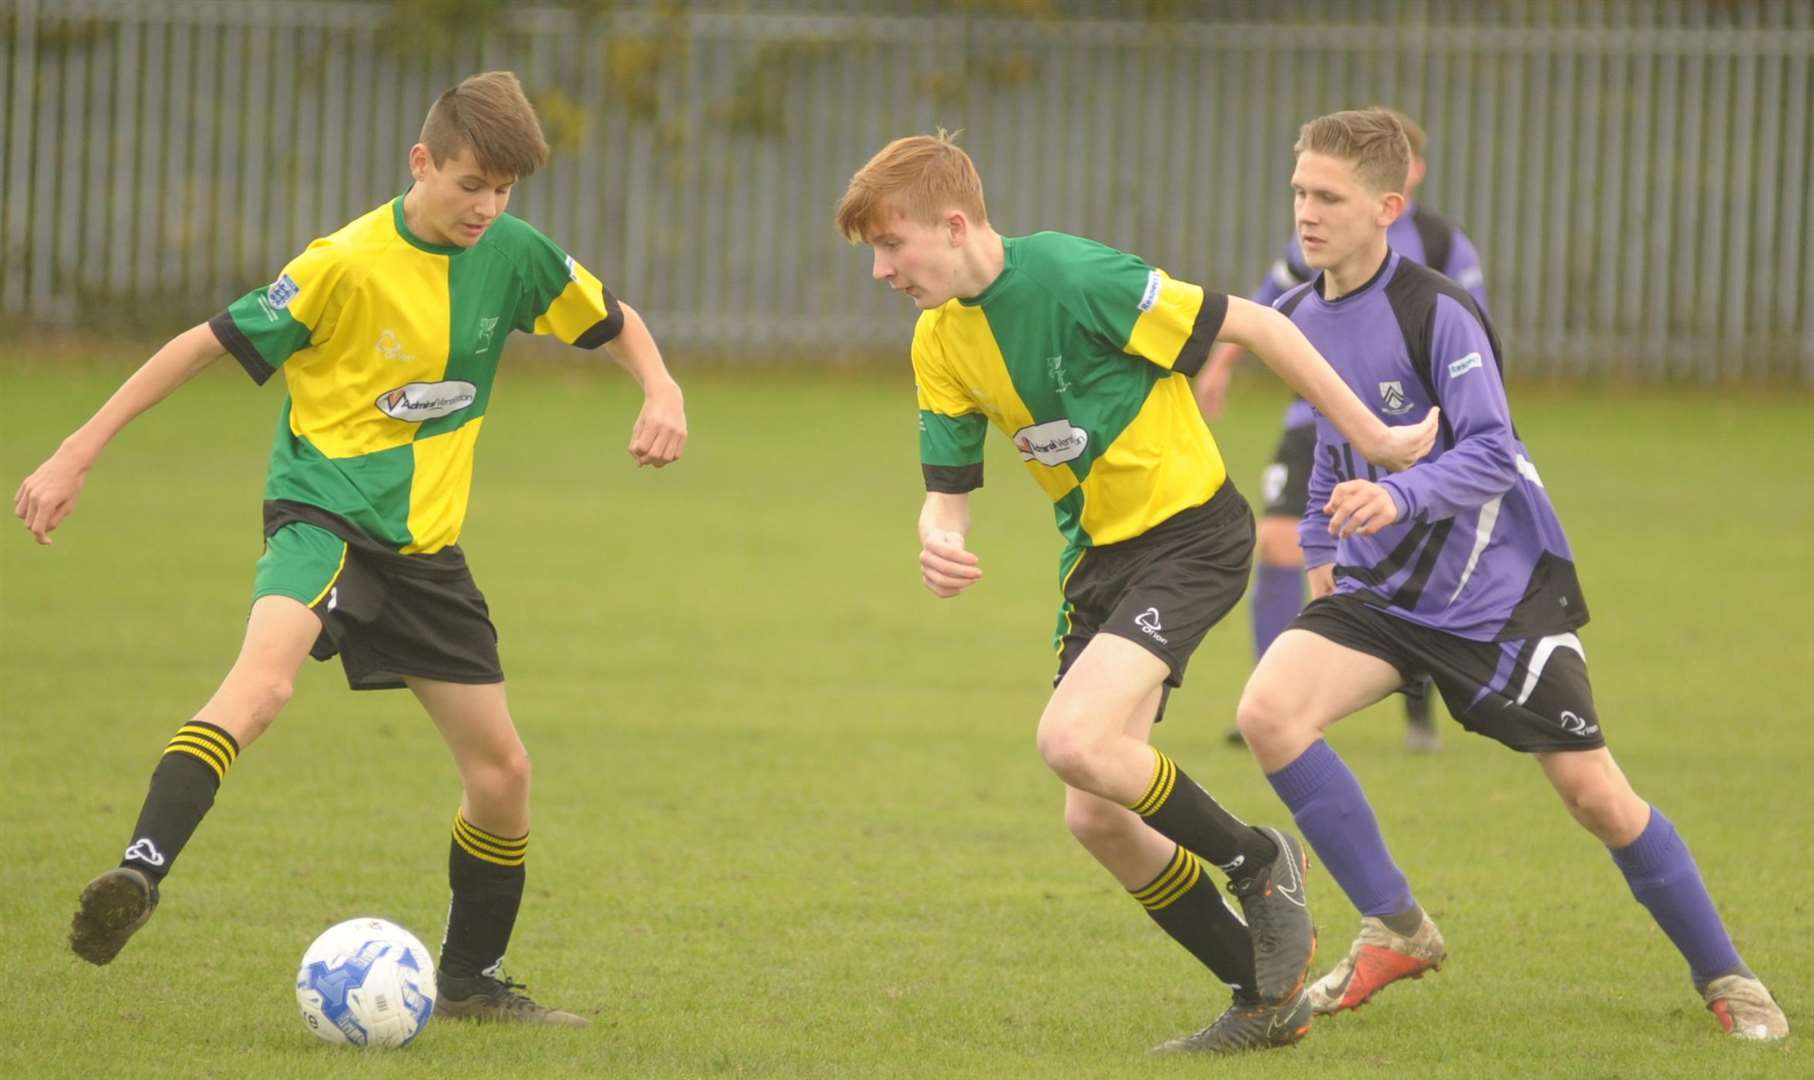 Under-16 Division 2 action between Anchorians United and Pegasus 81 Flyers Picture: Steve Crispe